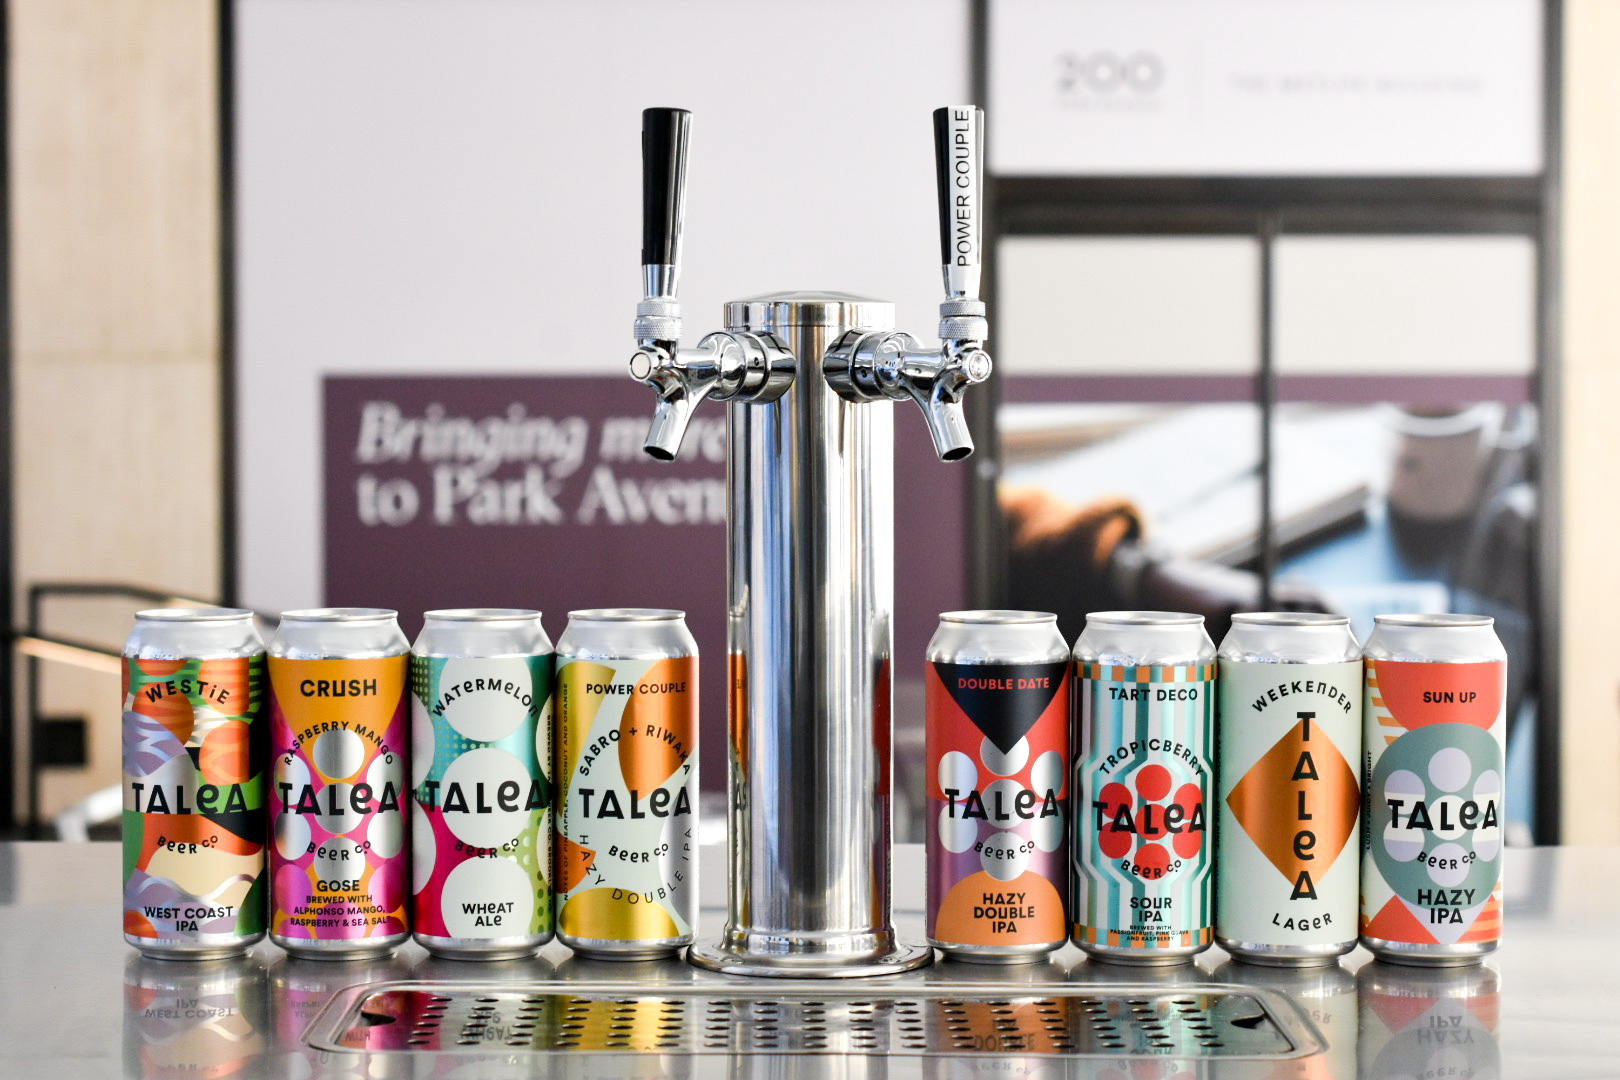 Talea Beer Co. opens outdoor pop-up brewery next to Grand Central | 6sqft